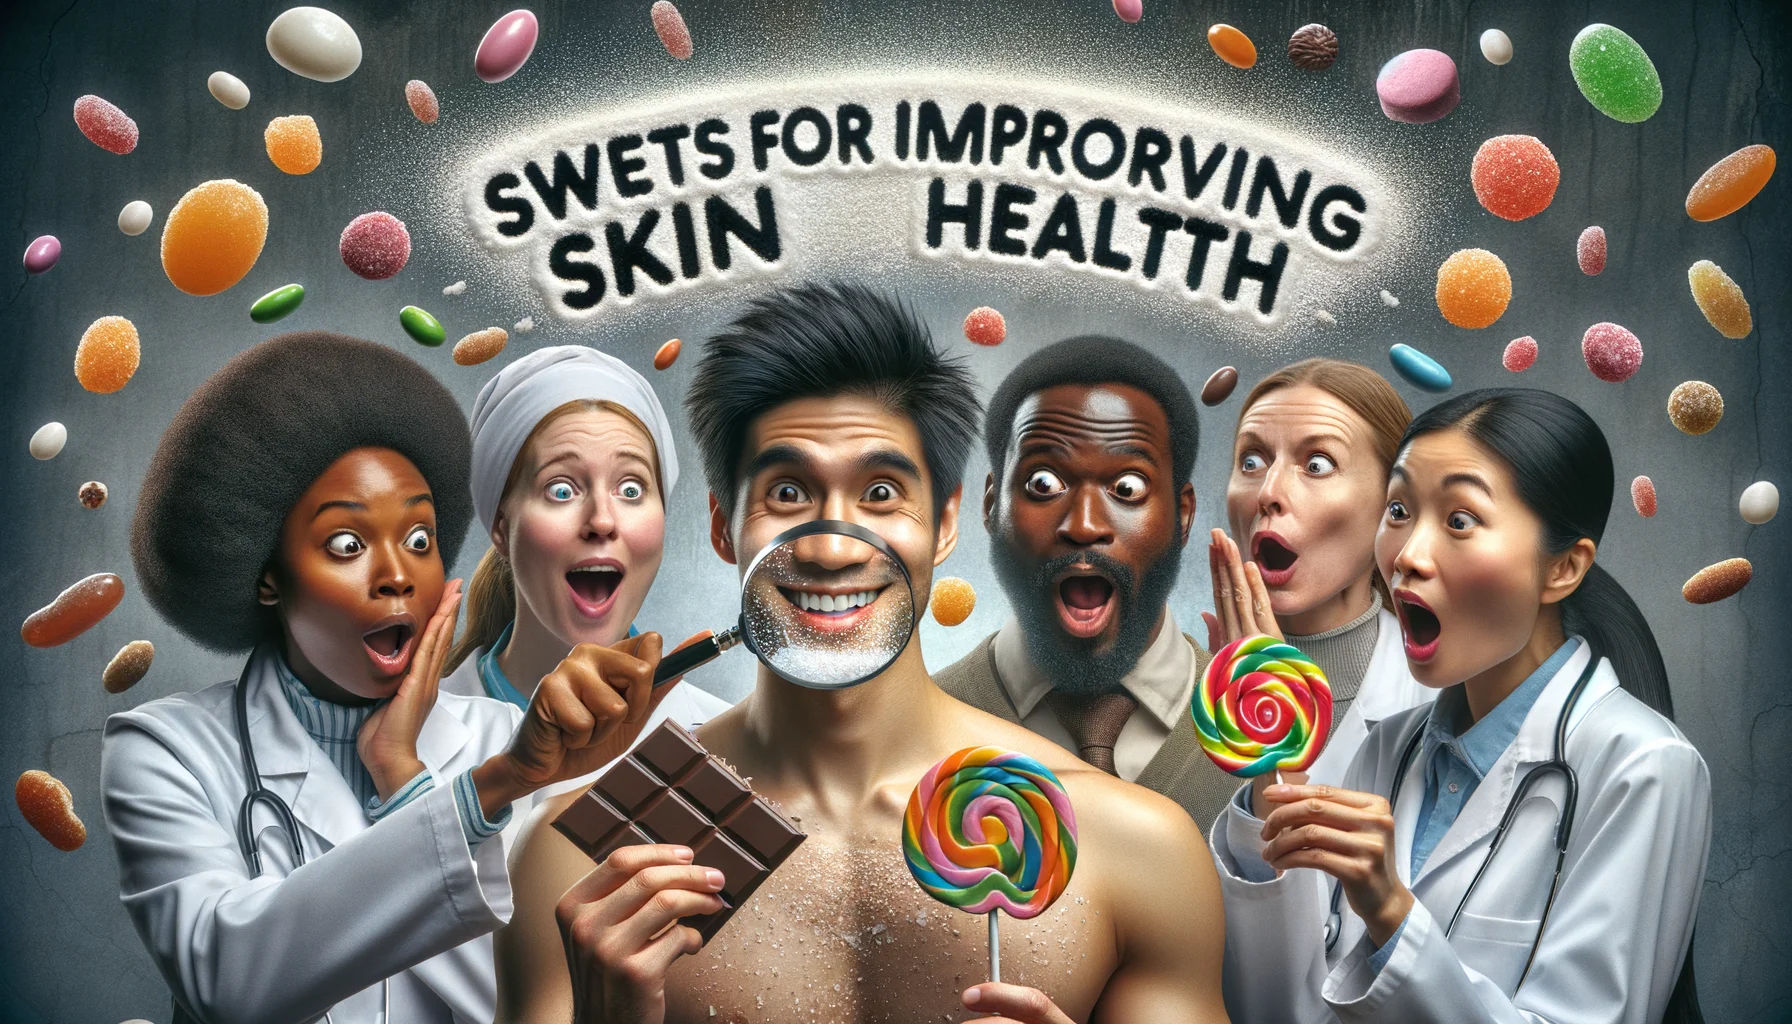 A humorous and realistic image featuring a scenario where a diverse group of individuals are indulging in sweets that are labeled as 'For Improving Skin Health'. A Black female dermatologist, astonished, holds a magnifying glass to a happy Caucasian man's radiant skin, with sugar crystals illuminatively twinkling. A surprised South Asian woman holds a colorful candy, while a Hispanic man grins, holding an antioxidant-rich dark chocolate bar. Balancing the humor is a Middle-Eastern female nutritionist, amused and shocked, analyzing a multicolored lollipop. 'Sweets for Improving Skin Health' is humorously written in airy sugar dust above the scene.